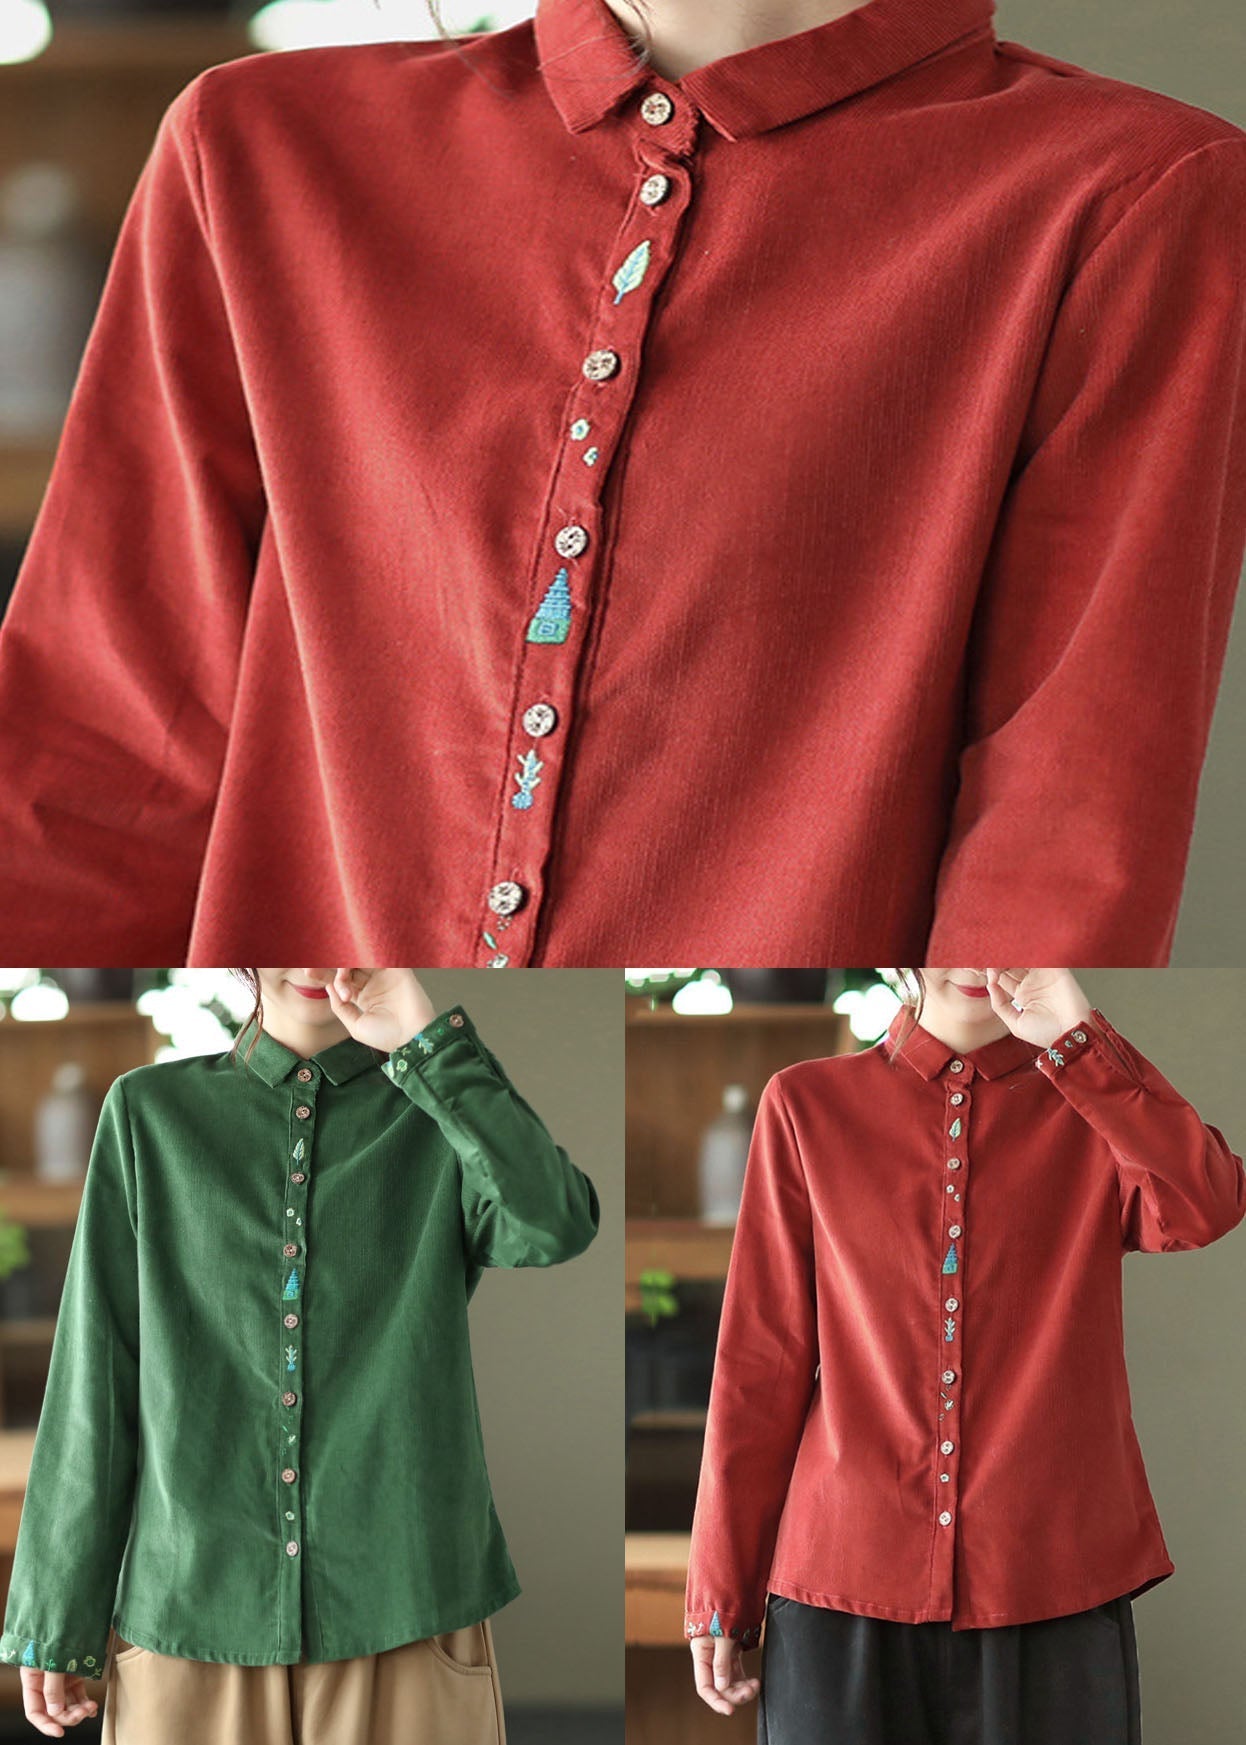 Retro Red Embroideried Patchwork Corduroy Shirt Tops Spring LY6252 - fabuloryshop